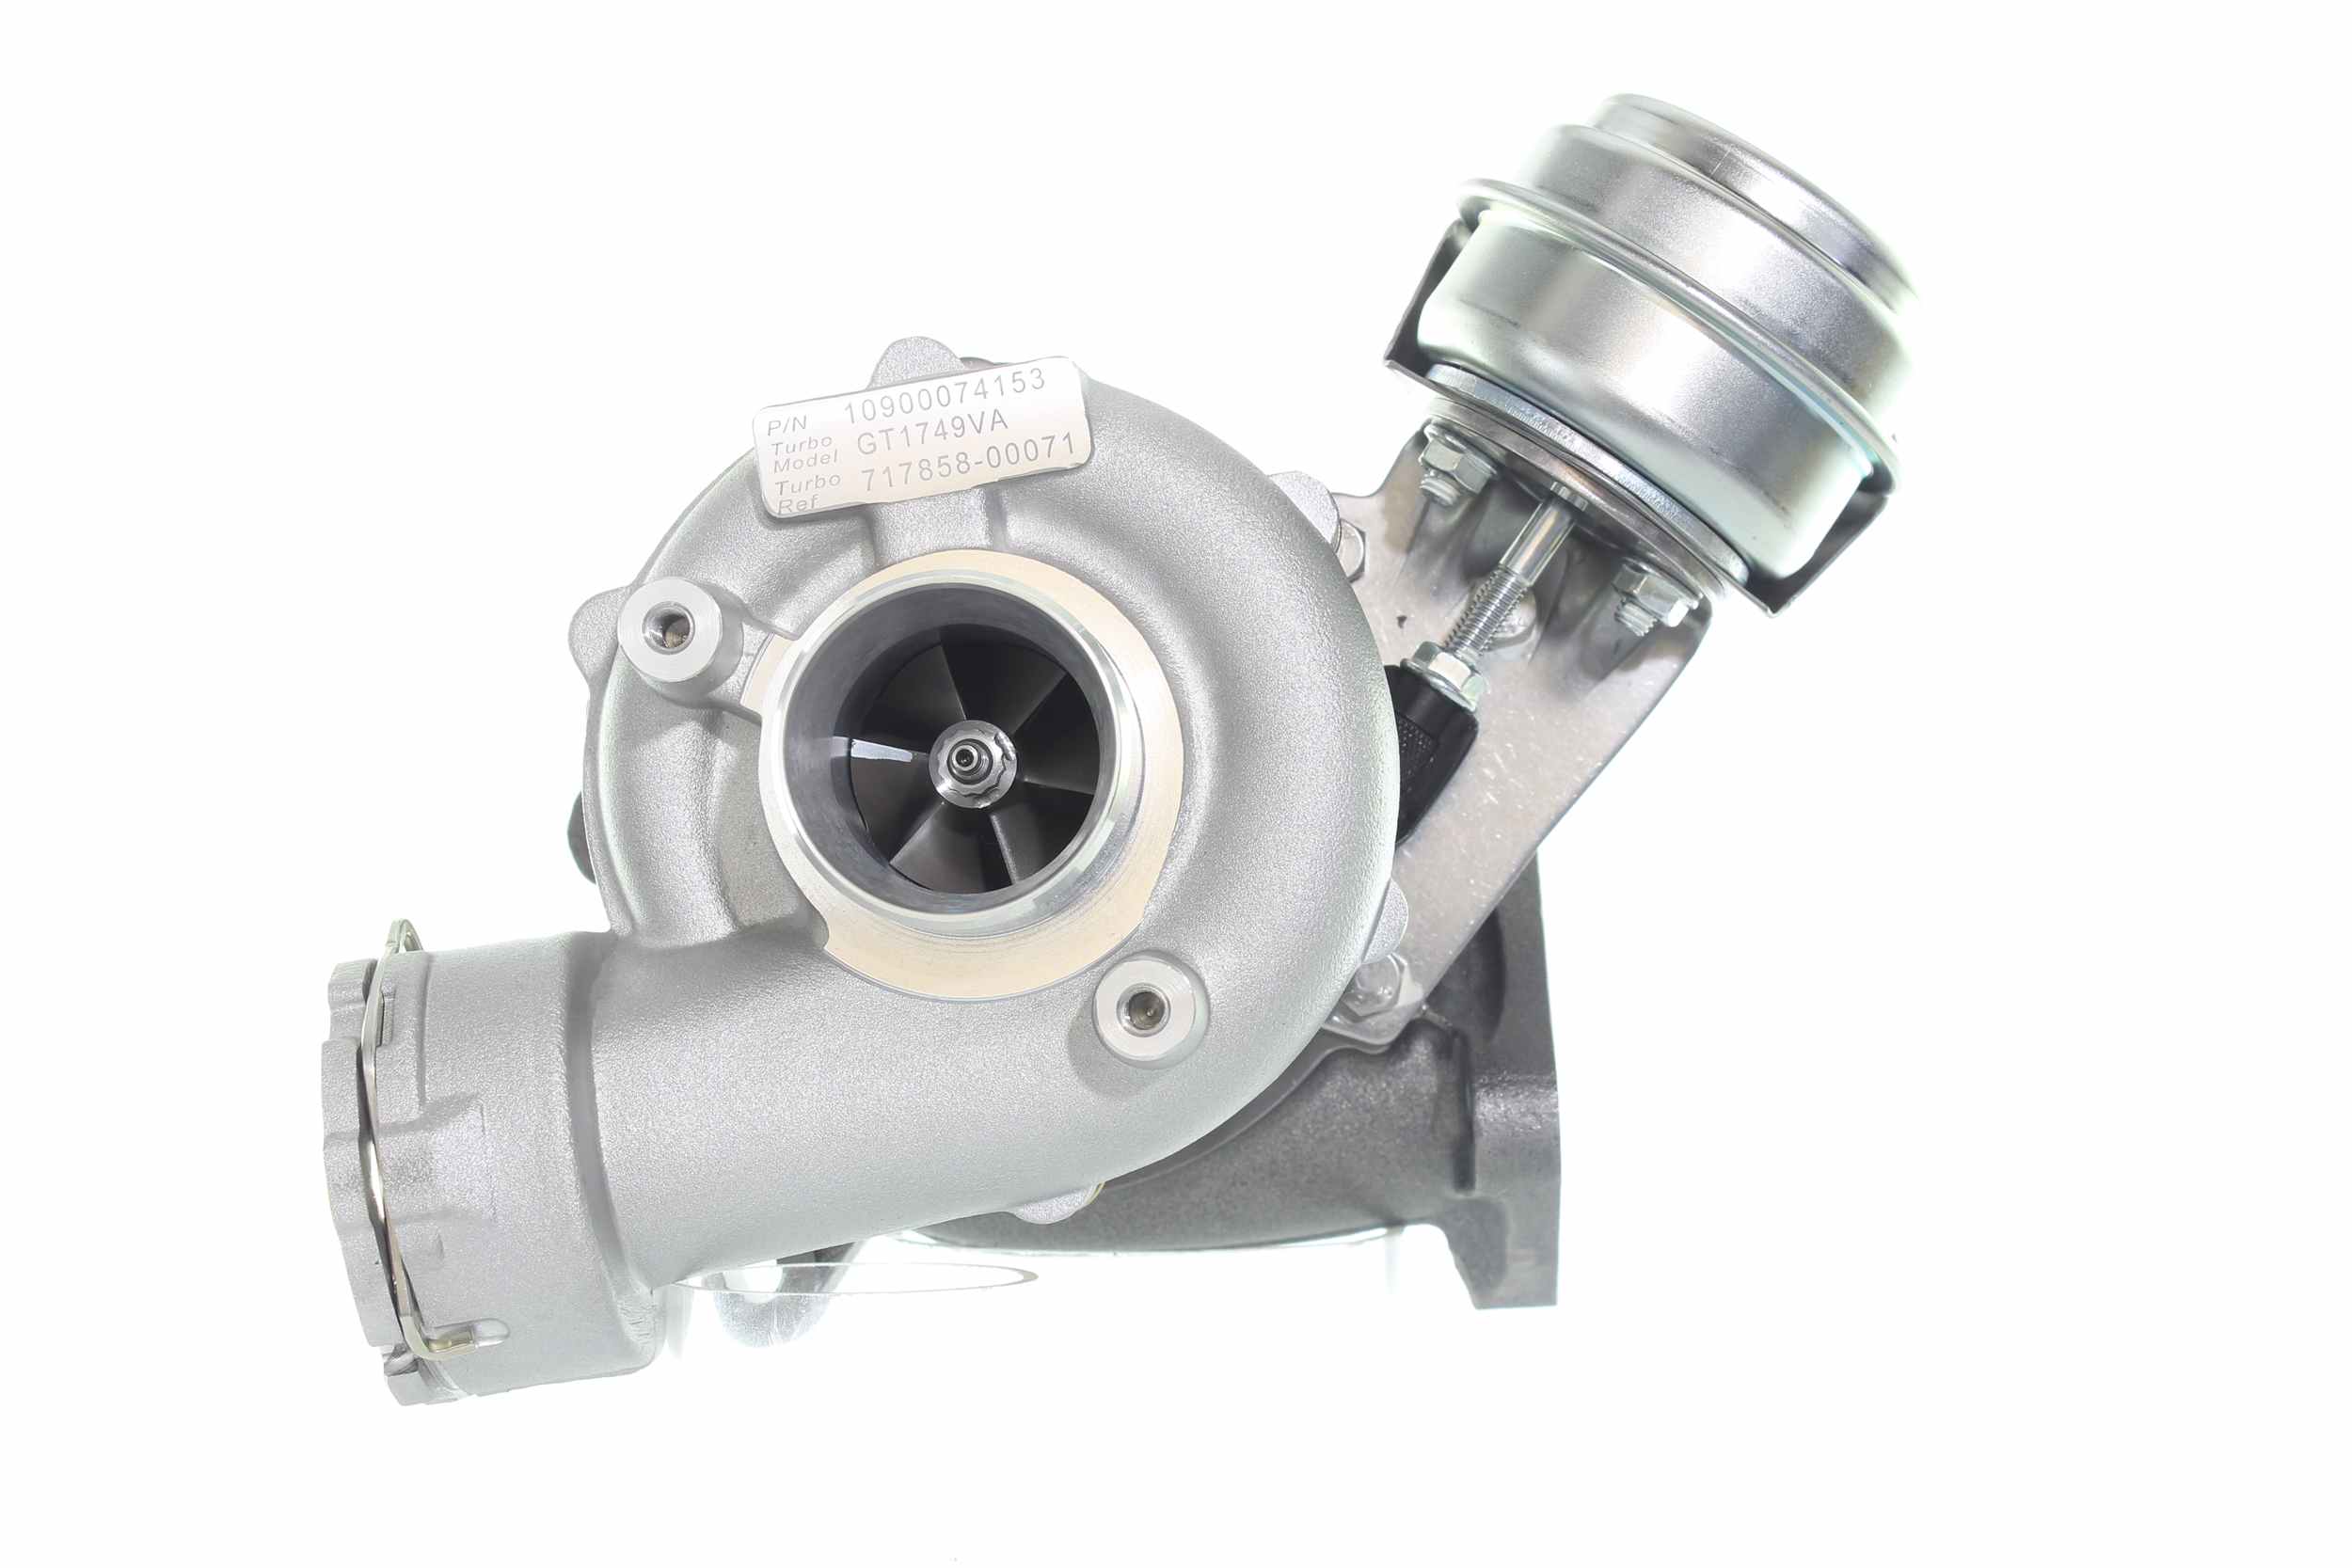 ALANKO 10900074 Turbocharger Exhaust Turbocharger, Incl. Gasket Set, with attachment material